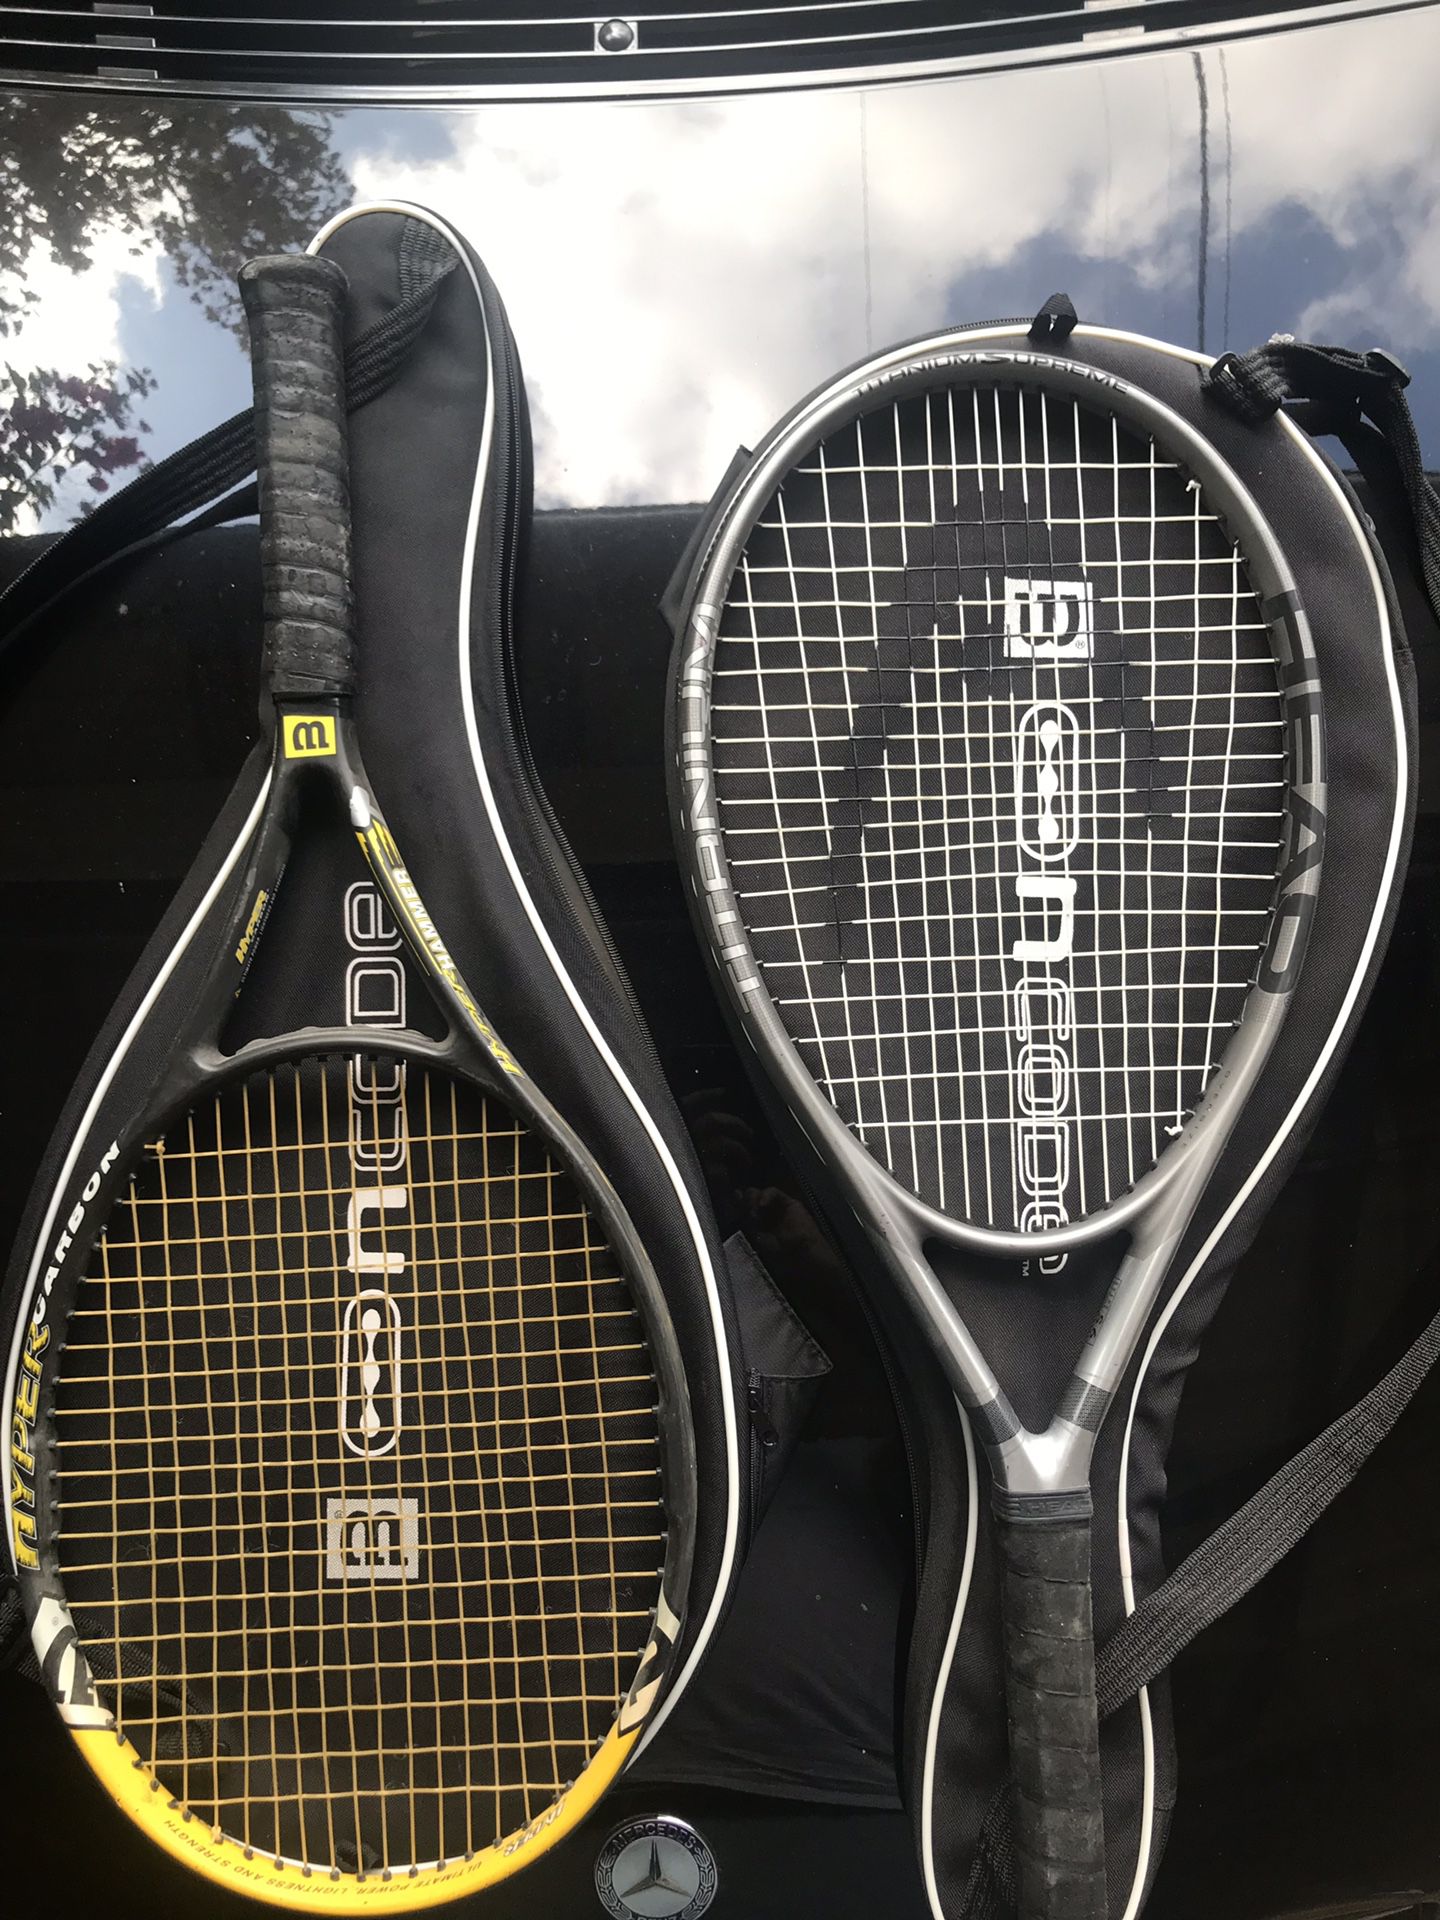 Two Tennis Rackets.